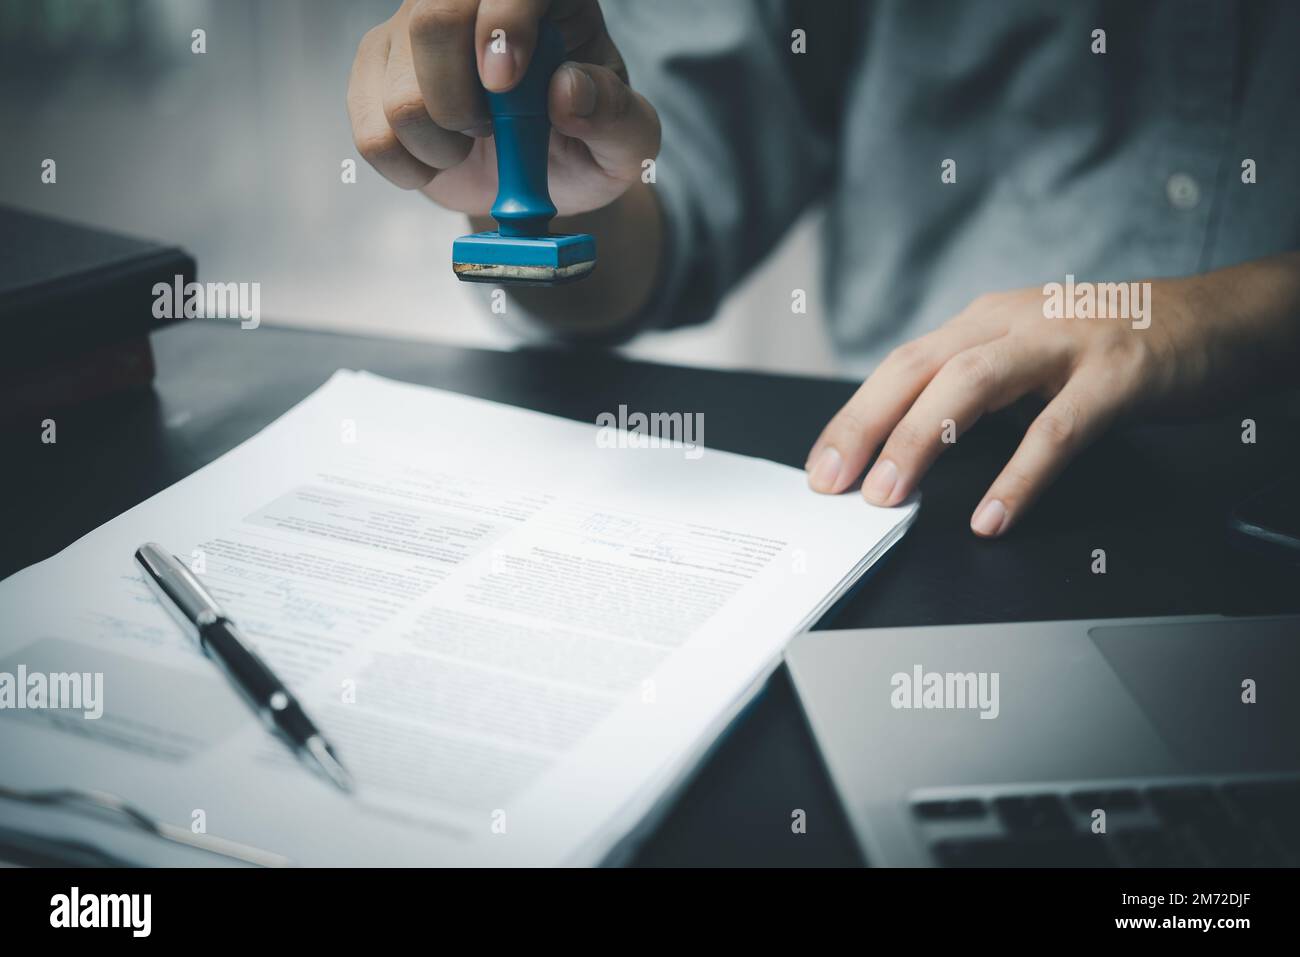 Man stamping approval of work finance banking or investment marketing documents on desk. Stock Photo